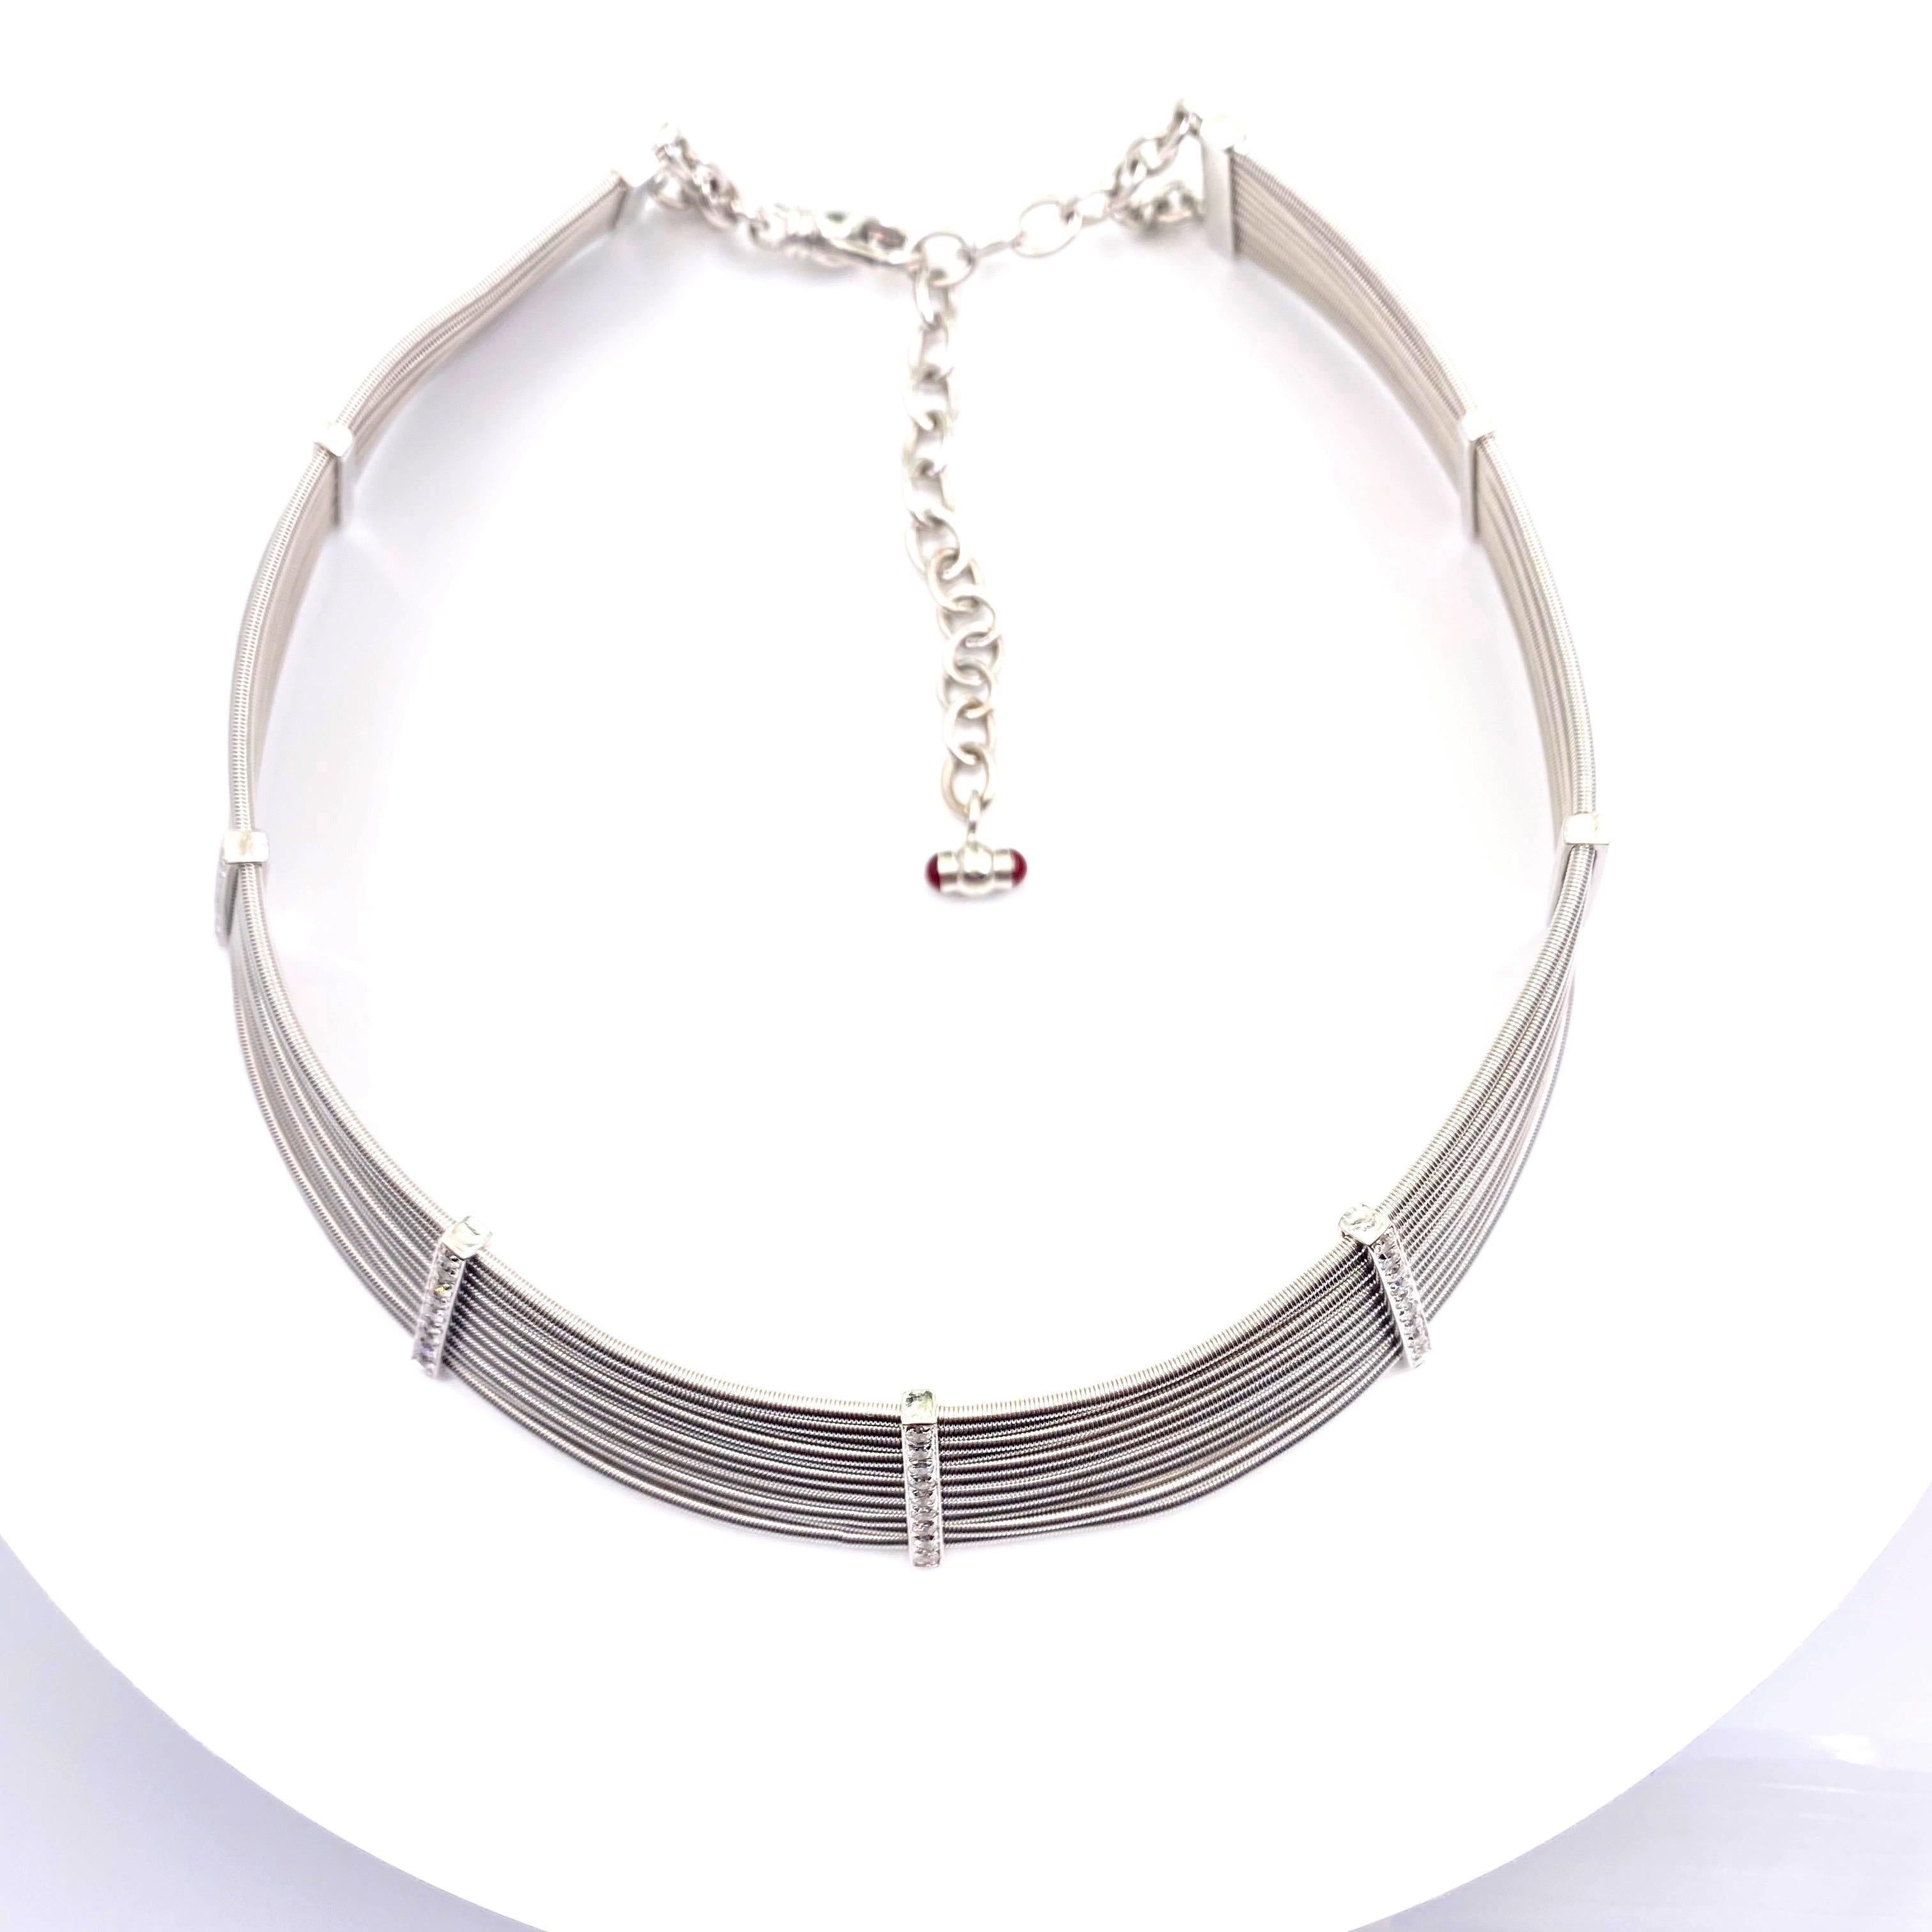 Round Brilliant Diamonds 1.75 Carat 18kt White Gold Cable Design Choker Necklace In Excellent Condition For Sale In San Diego, CA